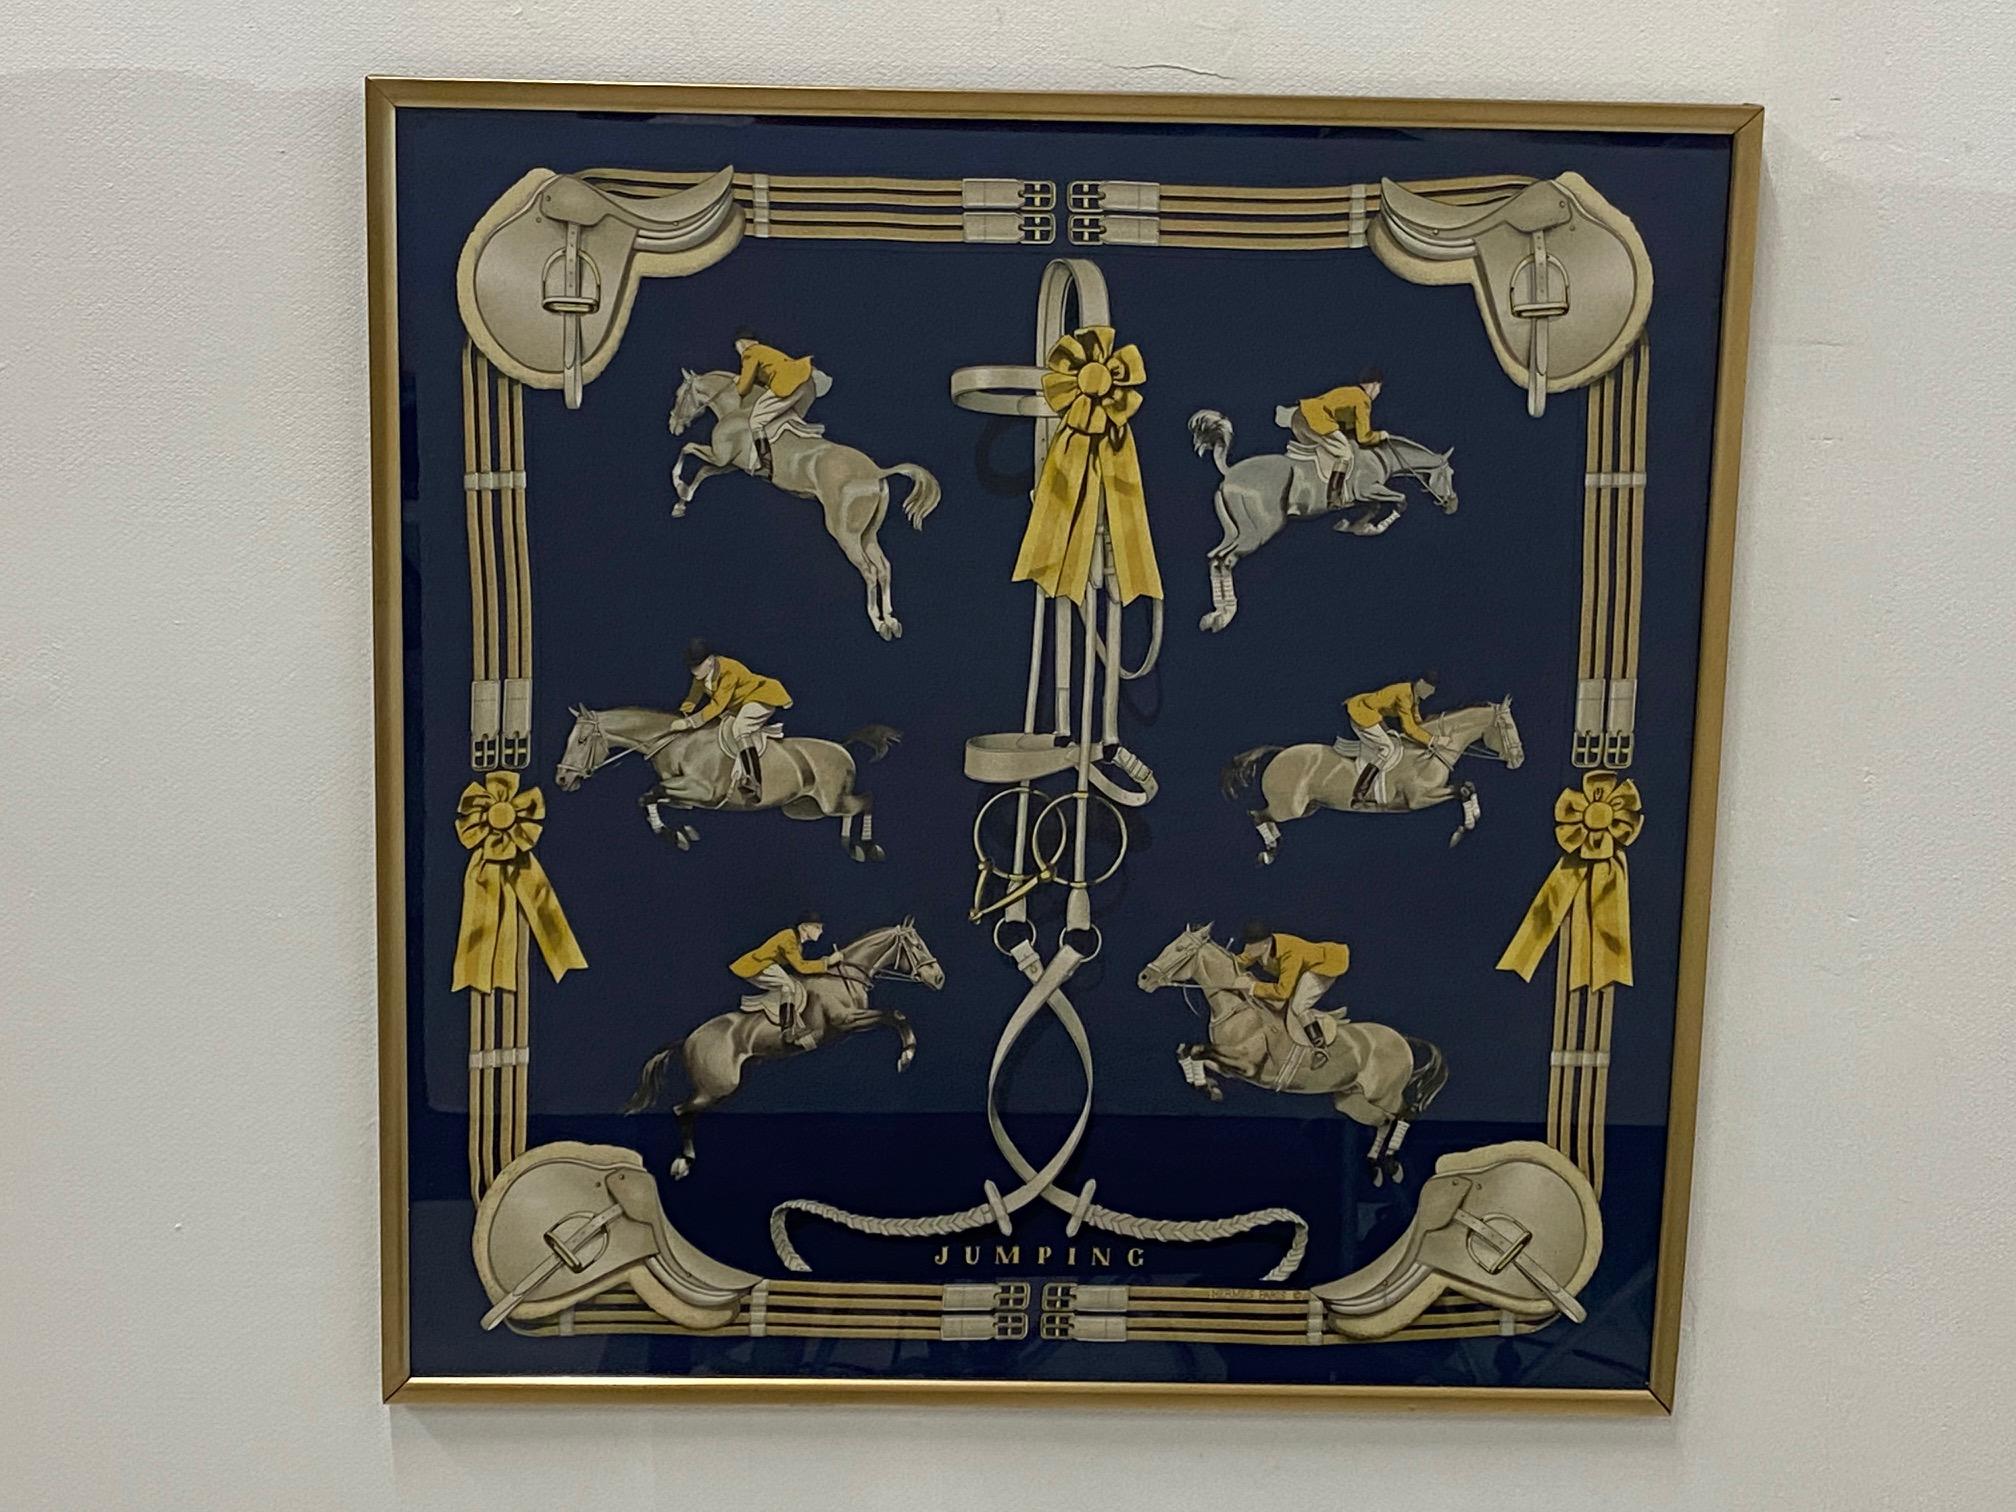 Classic framed Hermes scarf with wonderful equestrian motif in navy blue and gold makes a graphic luxurious piece of art. Simple custom gold frame.